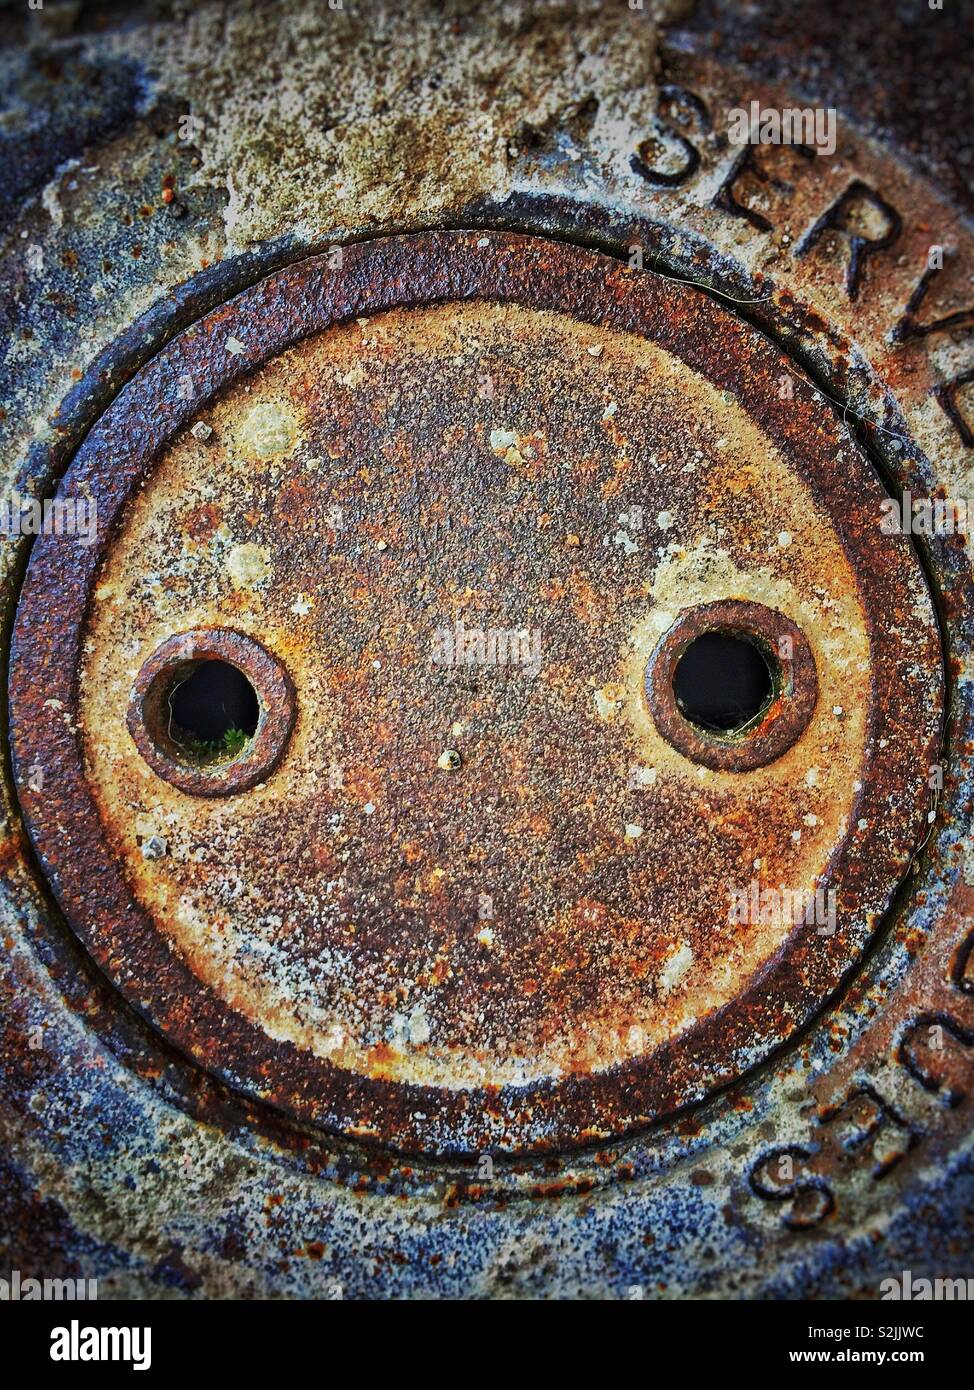 Faces in objects concept. Rusty sewer in Sabadell, Barcelona province, Catalonia Stock Photo